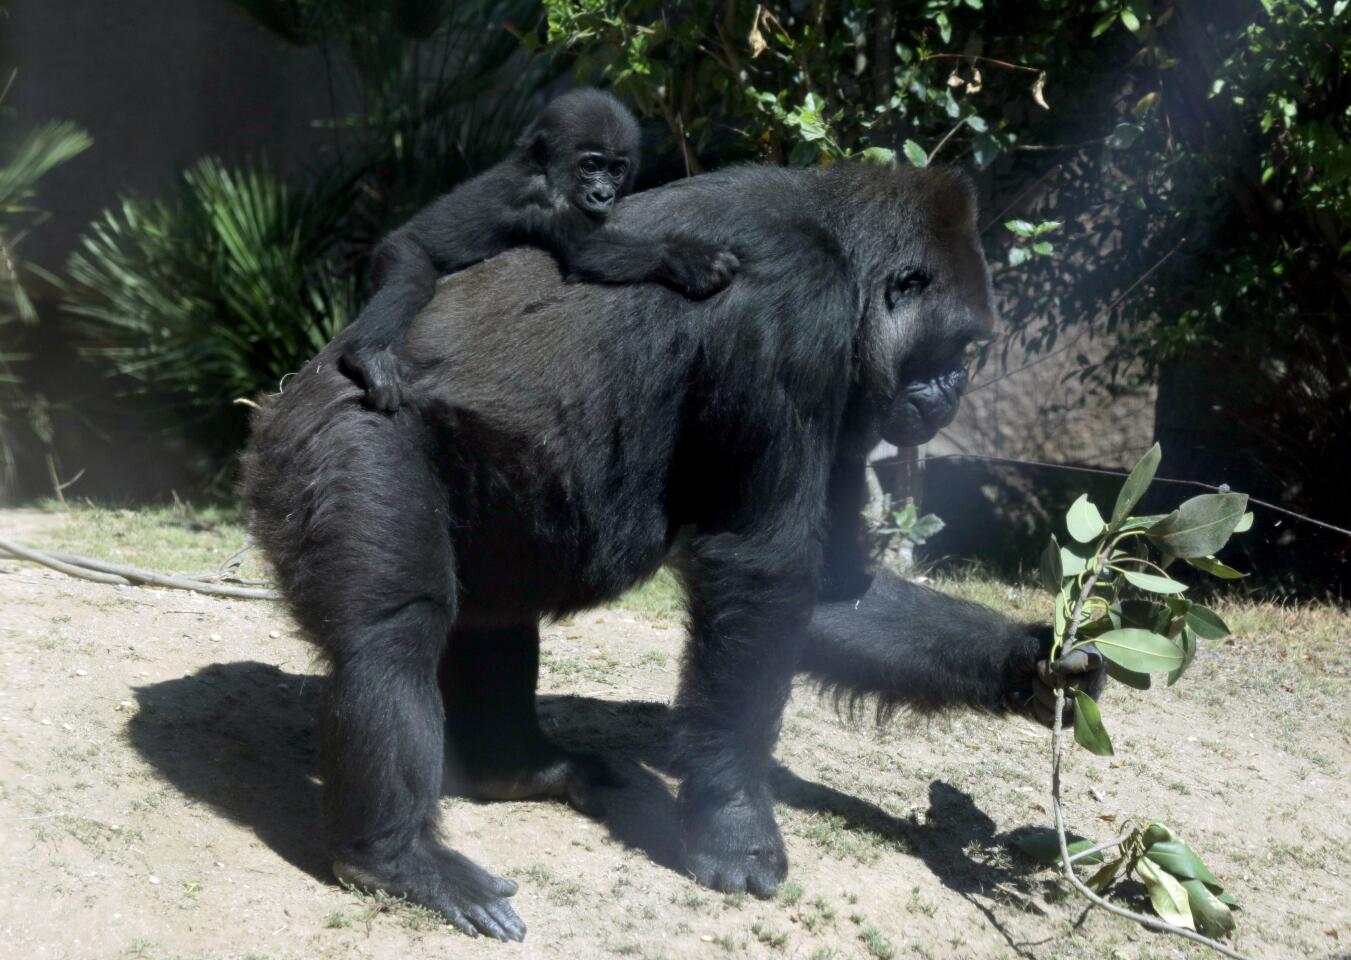 Angela, a 7-month-old western lowland gorilla, rides on mother N'djia's back at the L.A. Zoo.